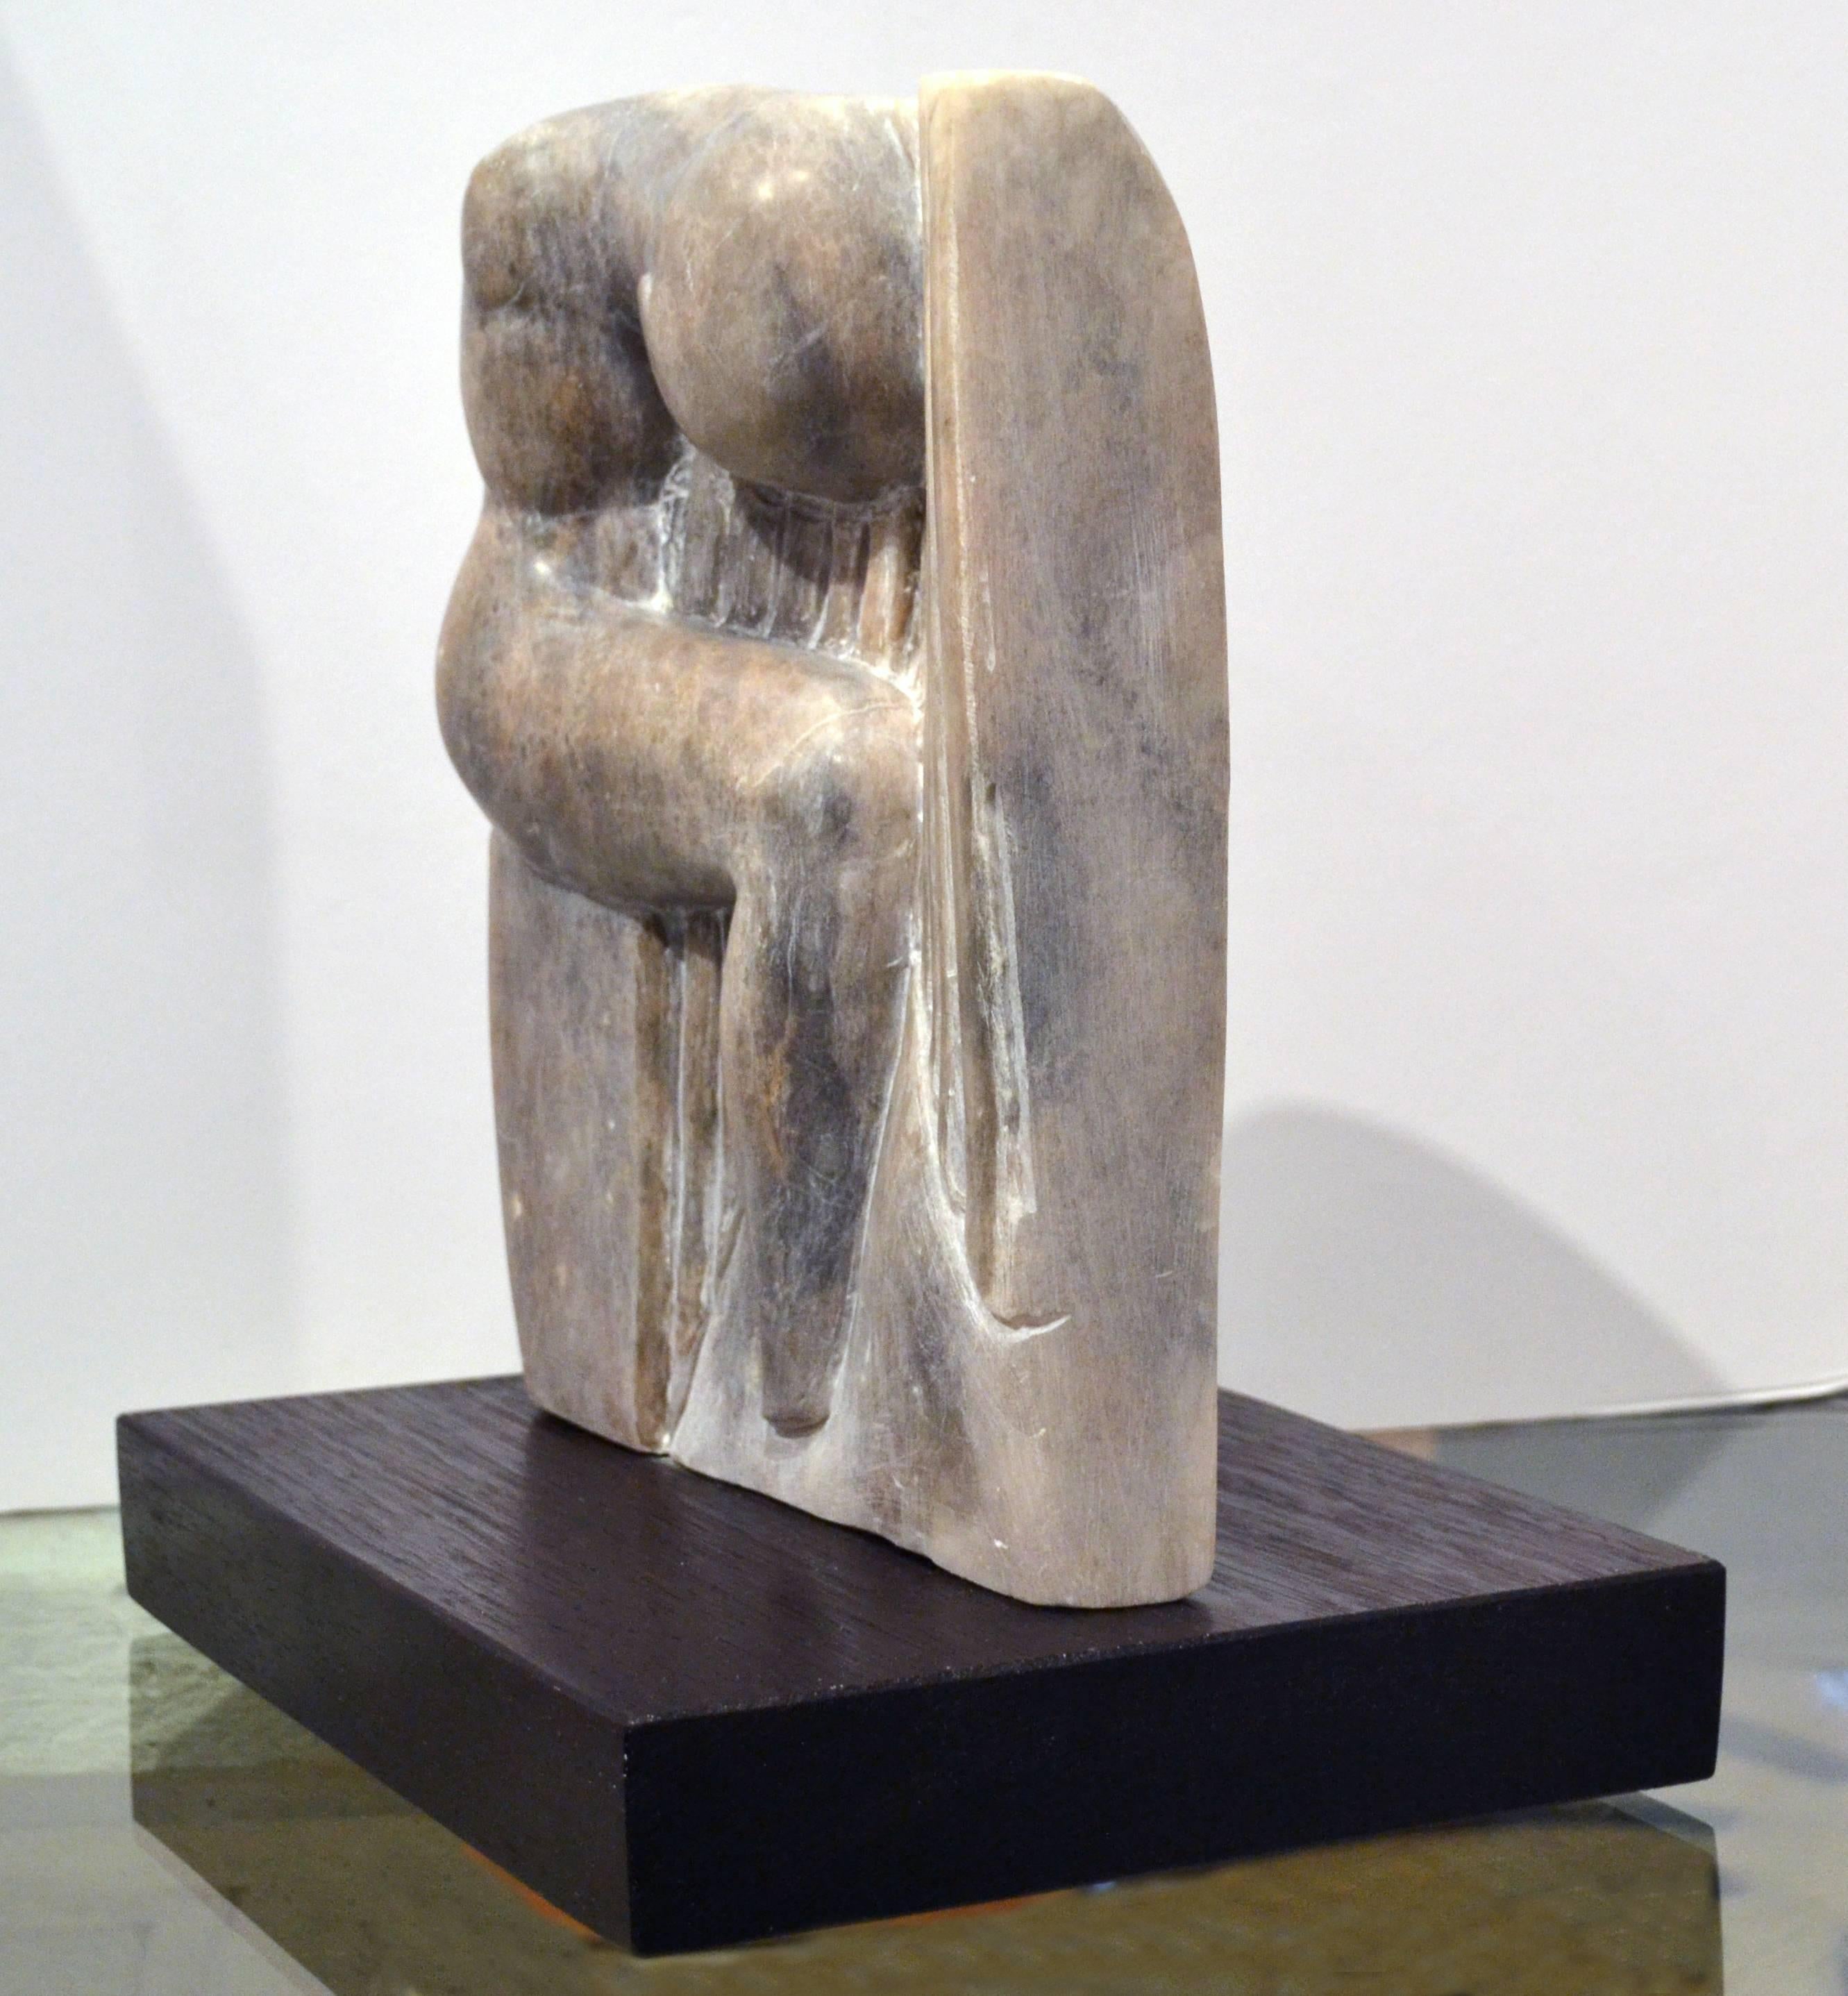 California artist Scott Donadio (b. 1961) hand-carved this abstract alabaster (mineral that is rather translucent) sculpture, it is signed at the base. The sculpture features a seated figure against a carved alabaster background. It is an elegant